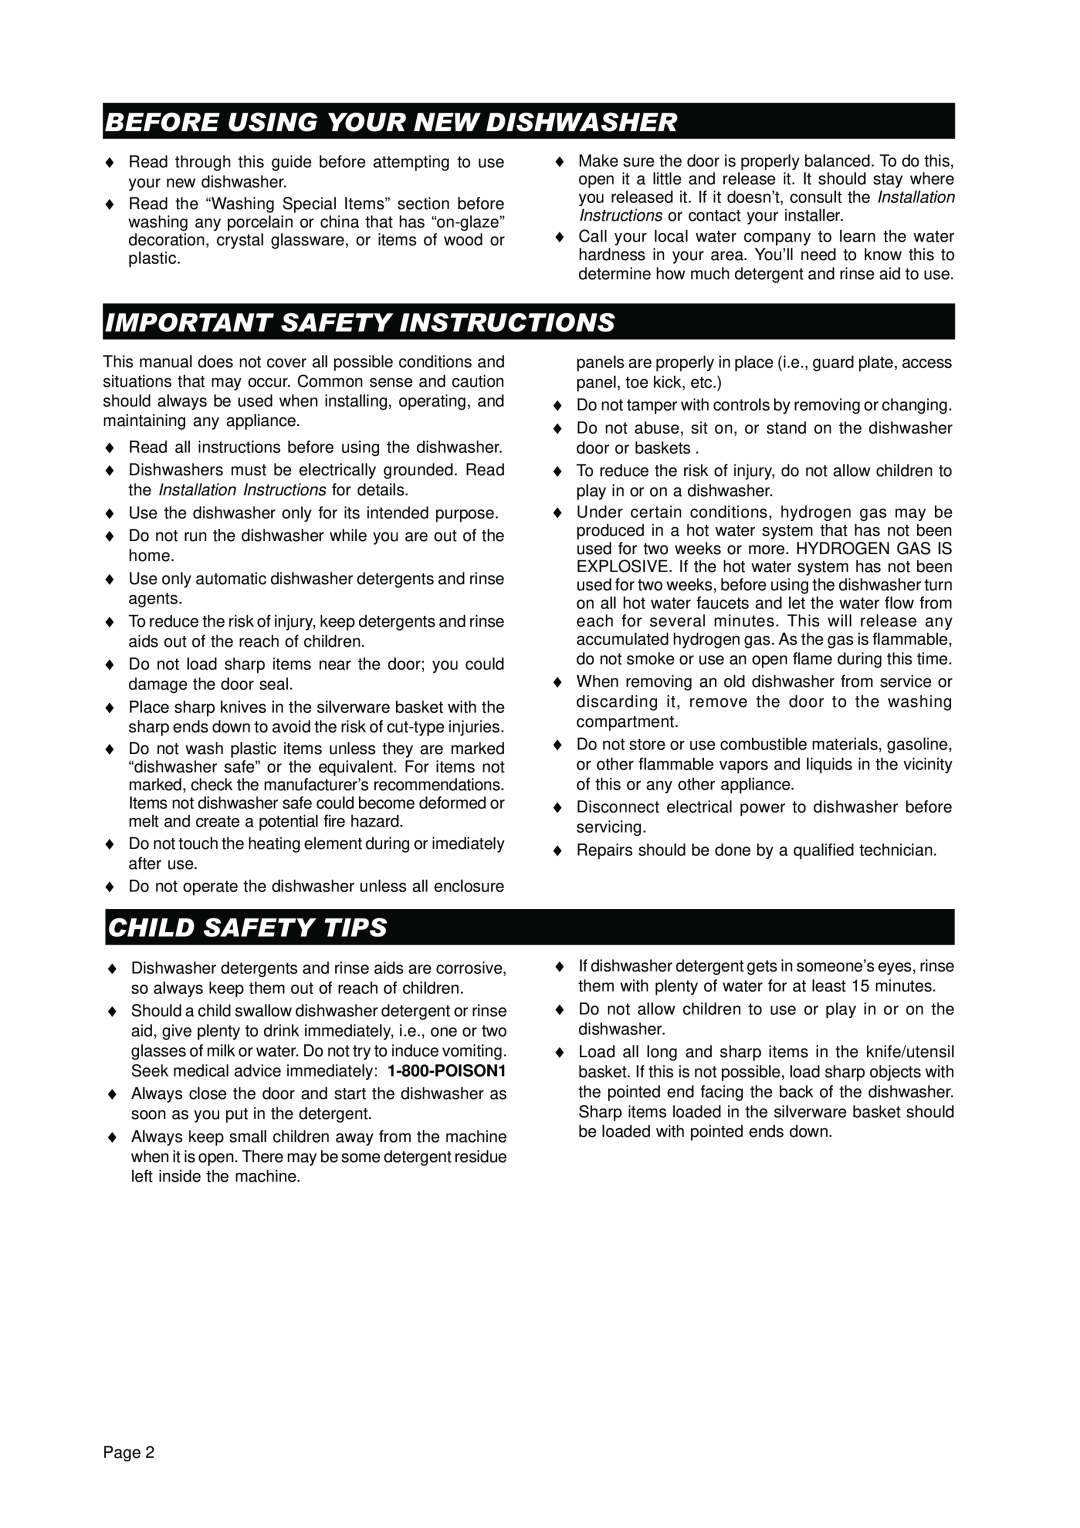 Asko D3450 important safety instructions Before Using Your New Dishwasher, Important Safety Instructions, Child Safety Tips 